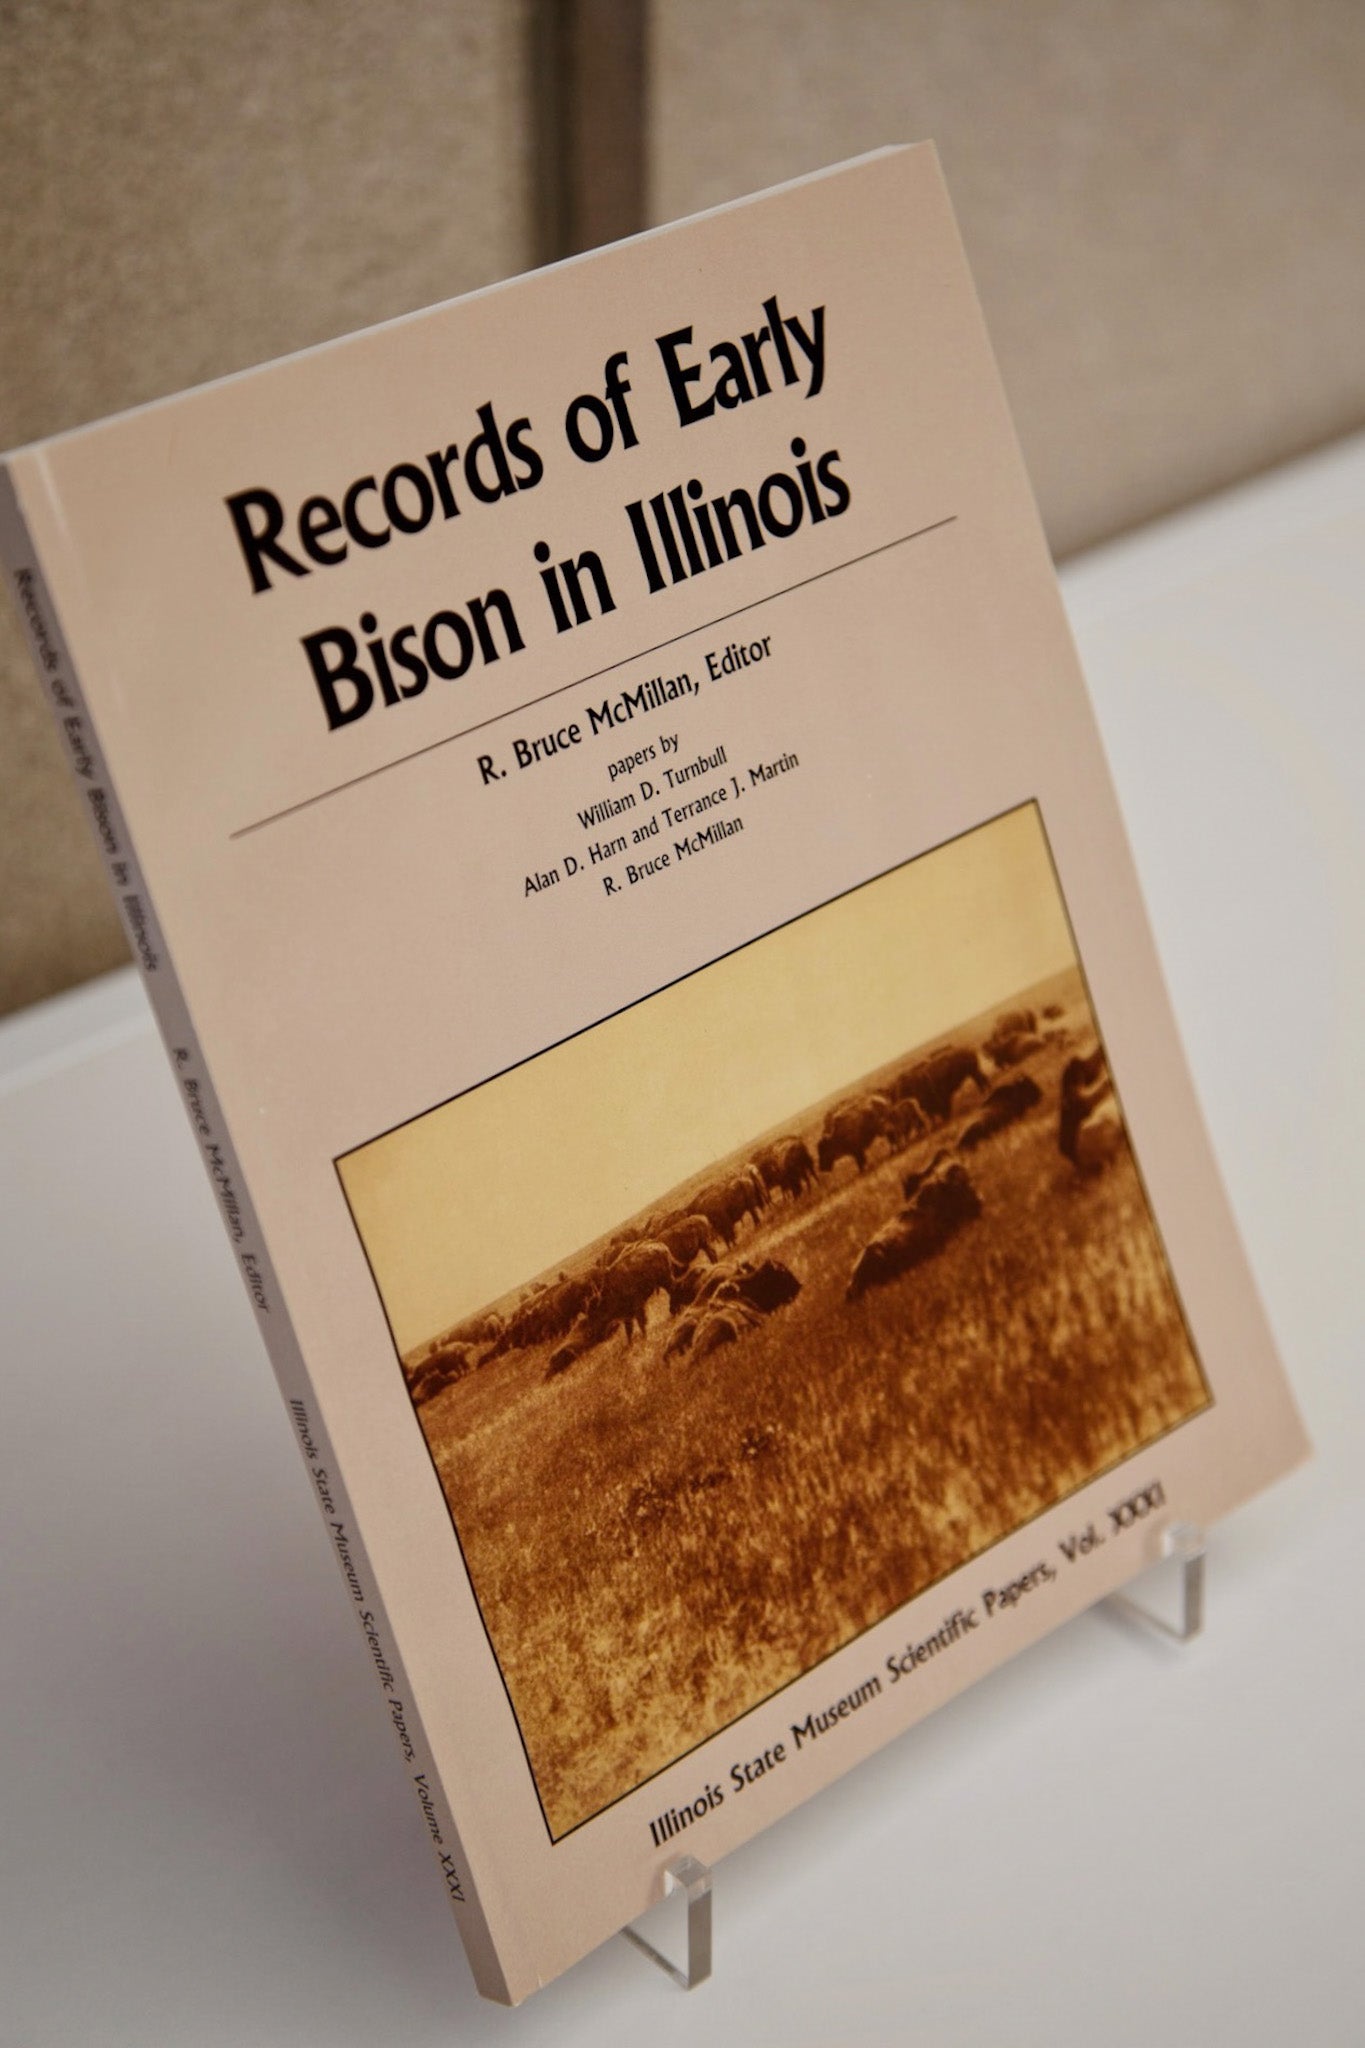 An angled view of “Records of Early Bison in Illinois”.